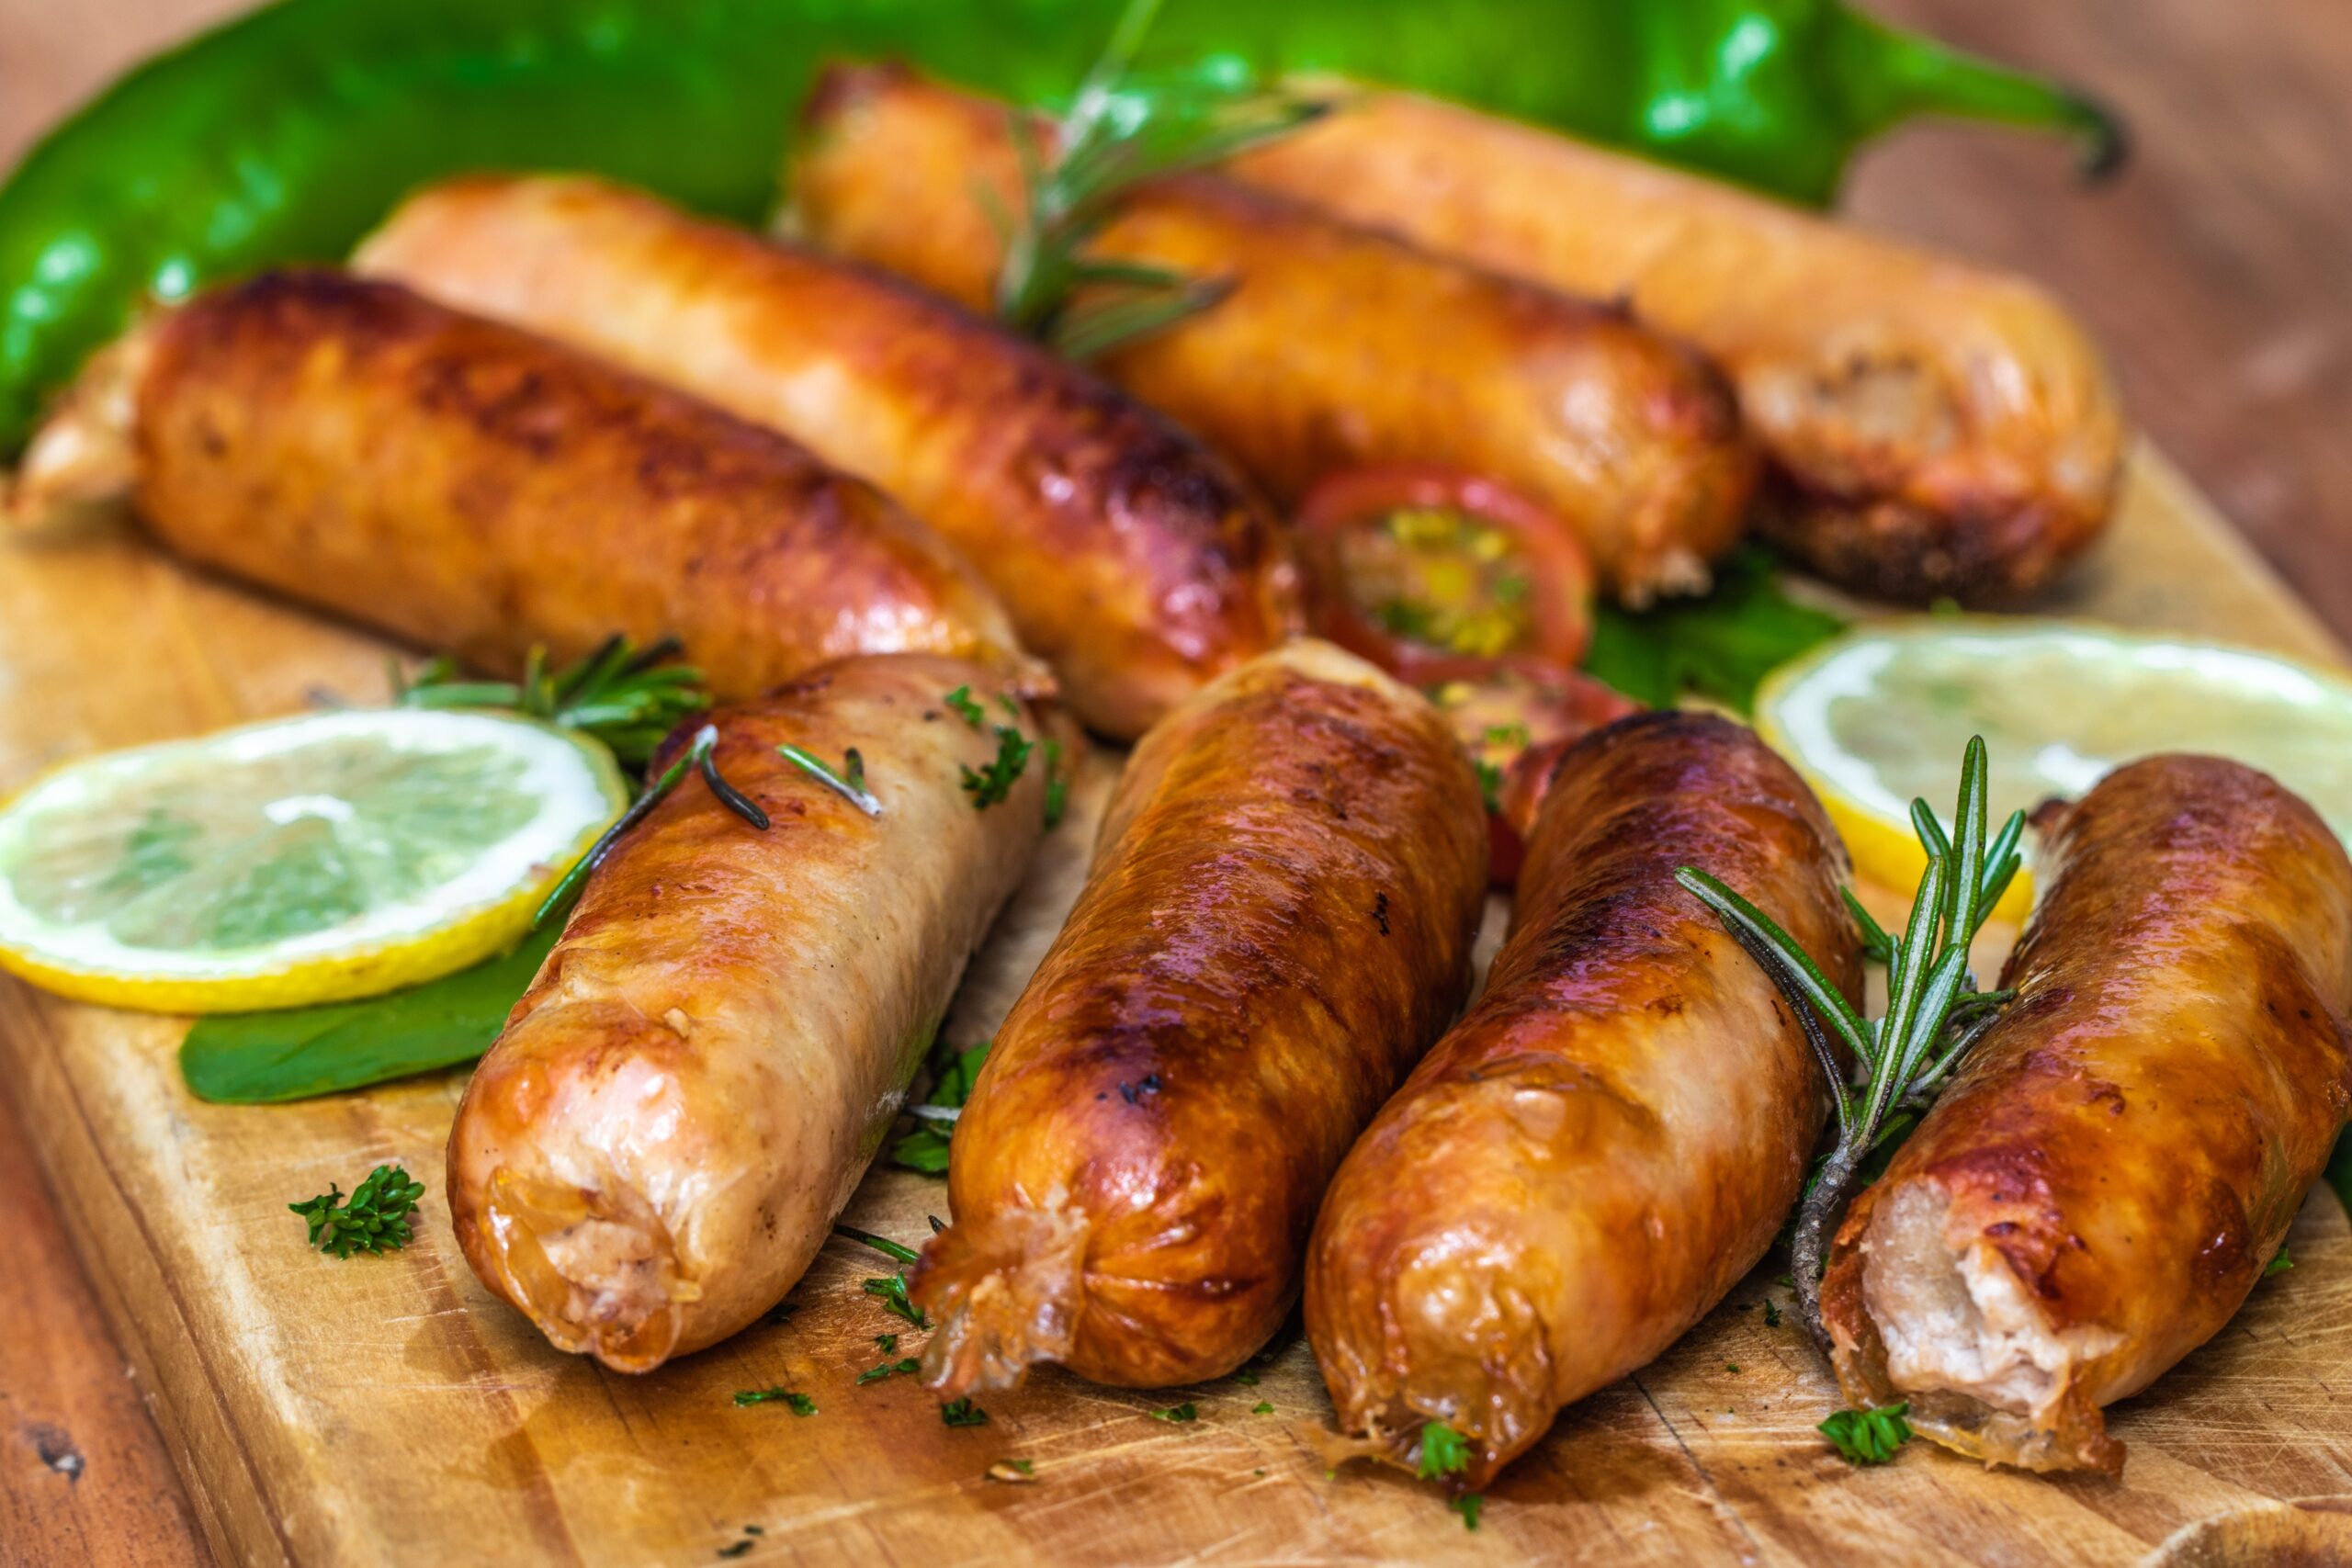 Cooked Sausages